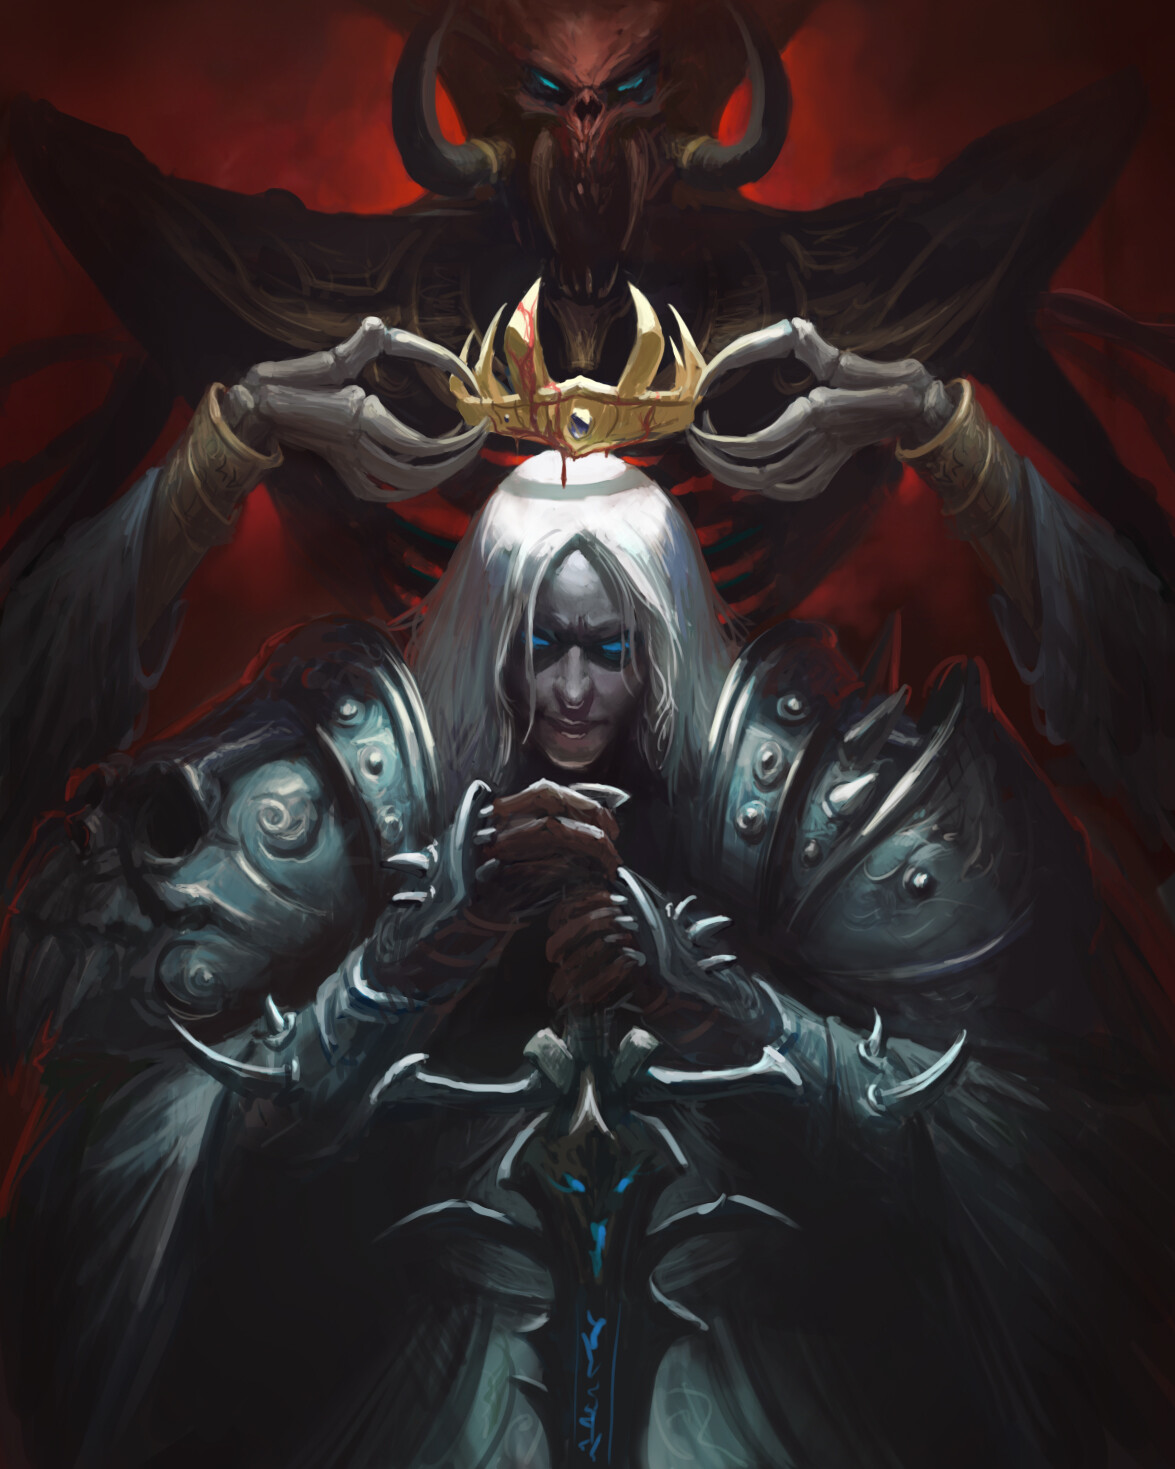 General 1175x1469 crown sword demon eyes blood Arthas Menethil Lich King portrait display armor World of Warcraft video games video game characters